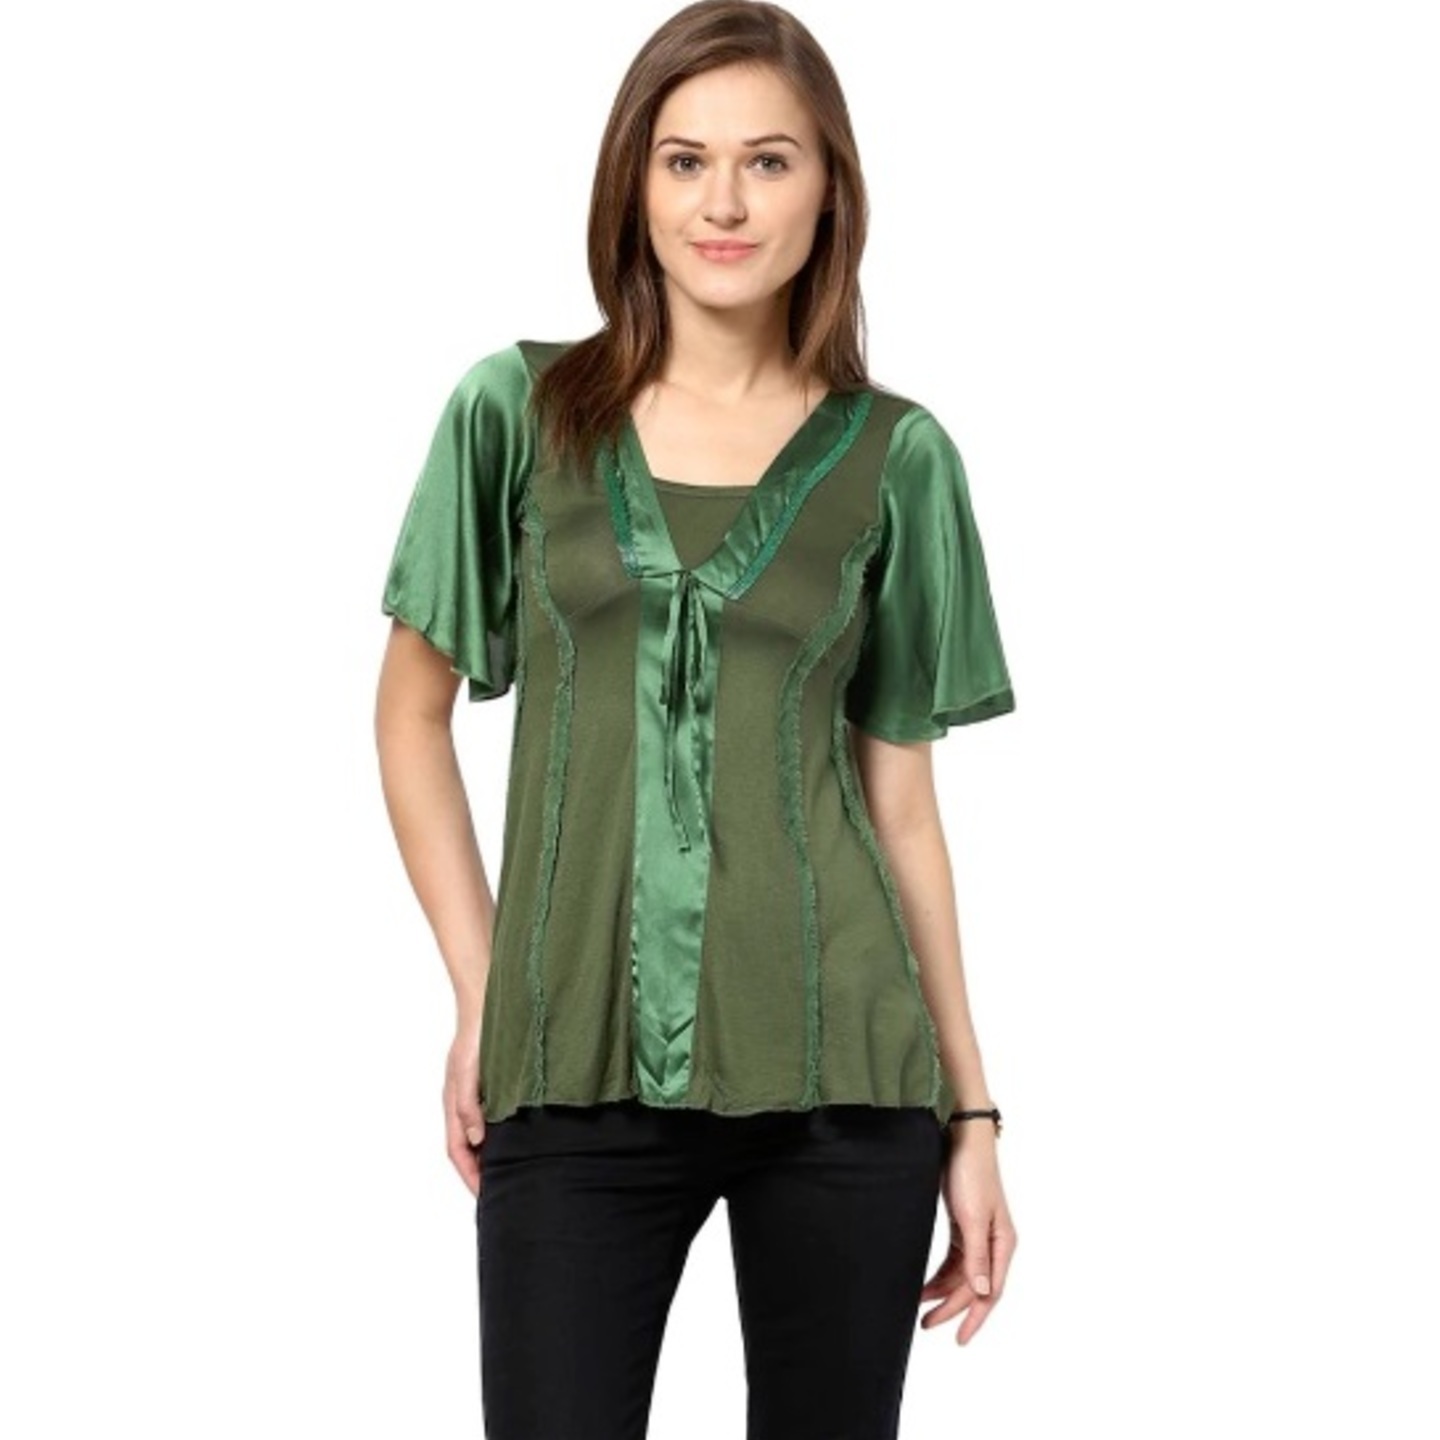 Remanika women top XL - Up to Extra 35 discount